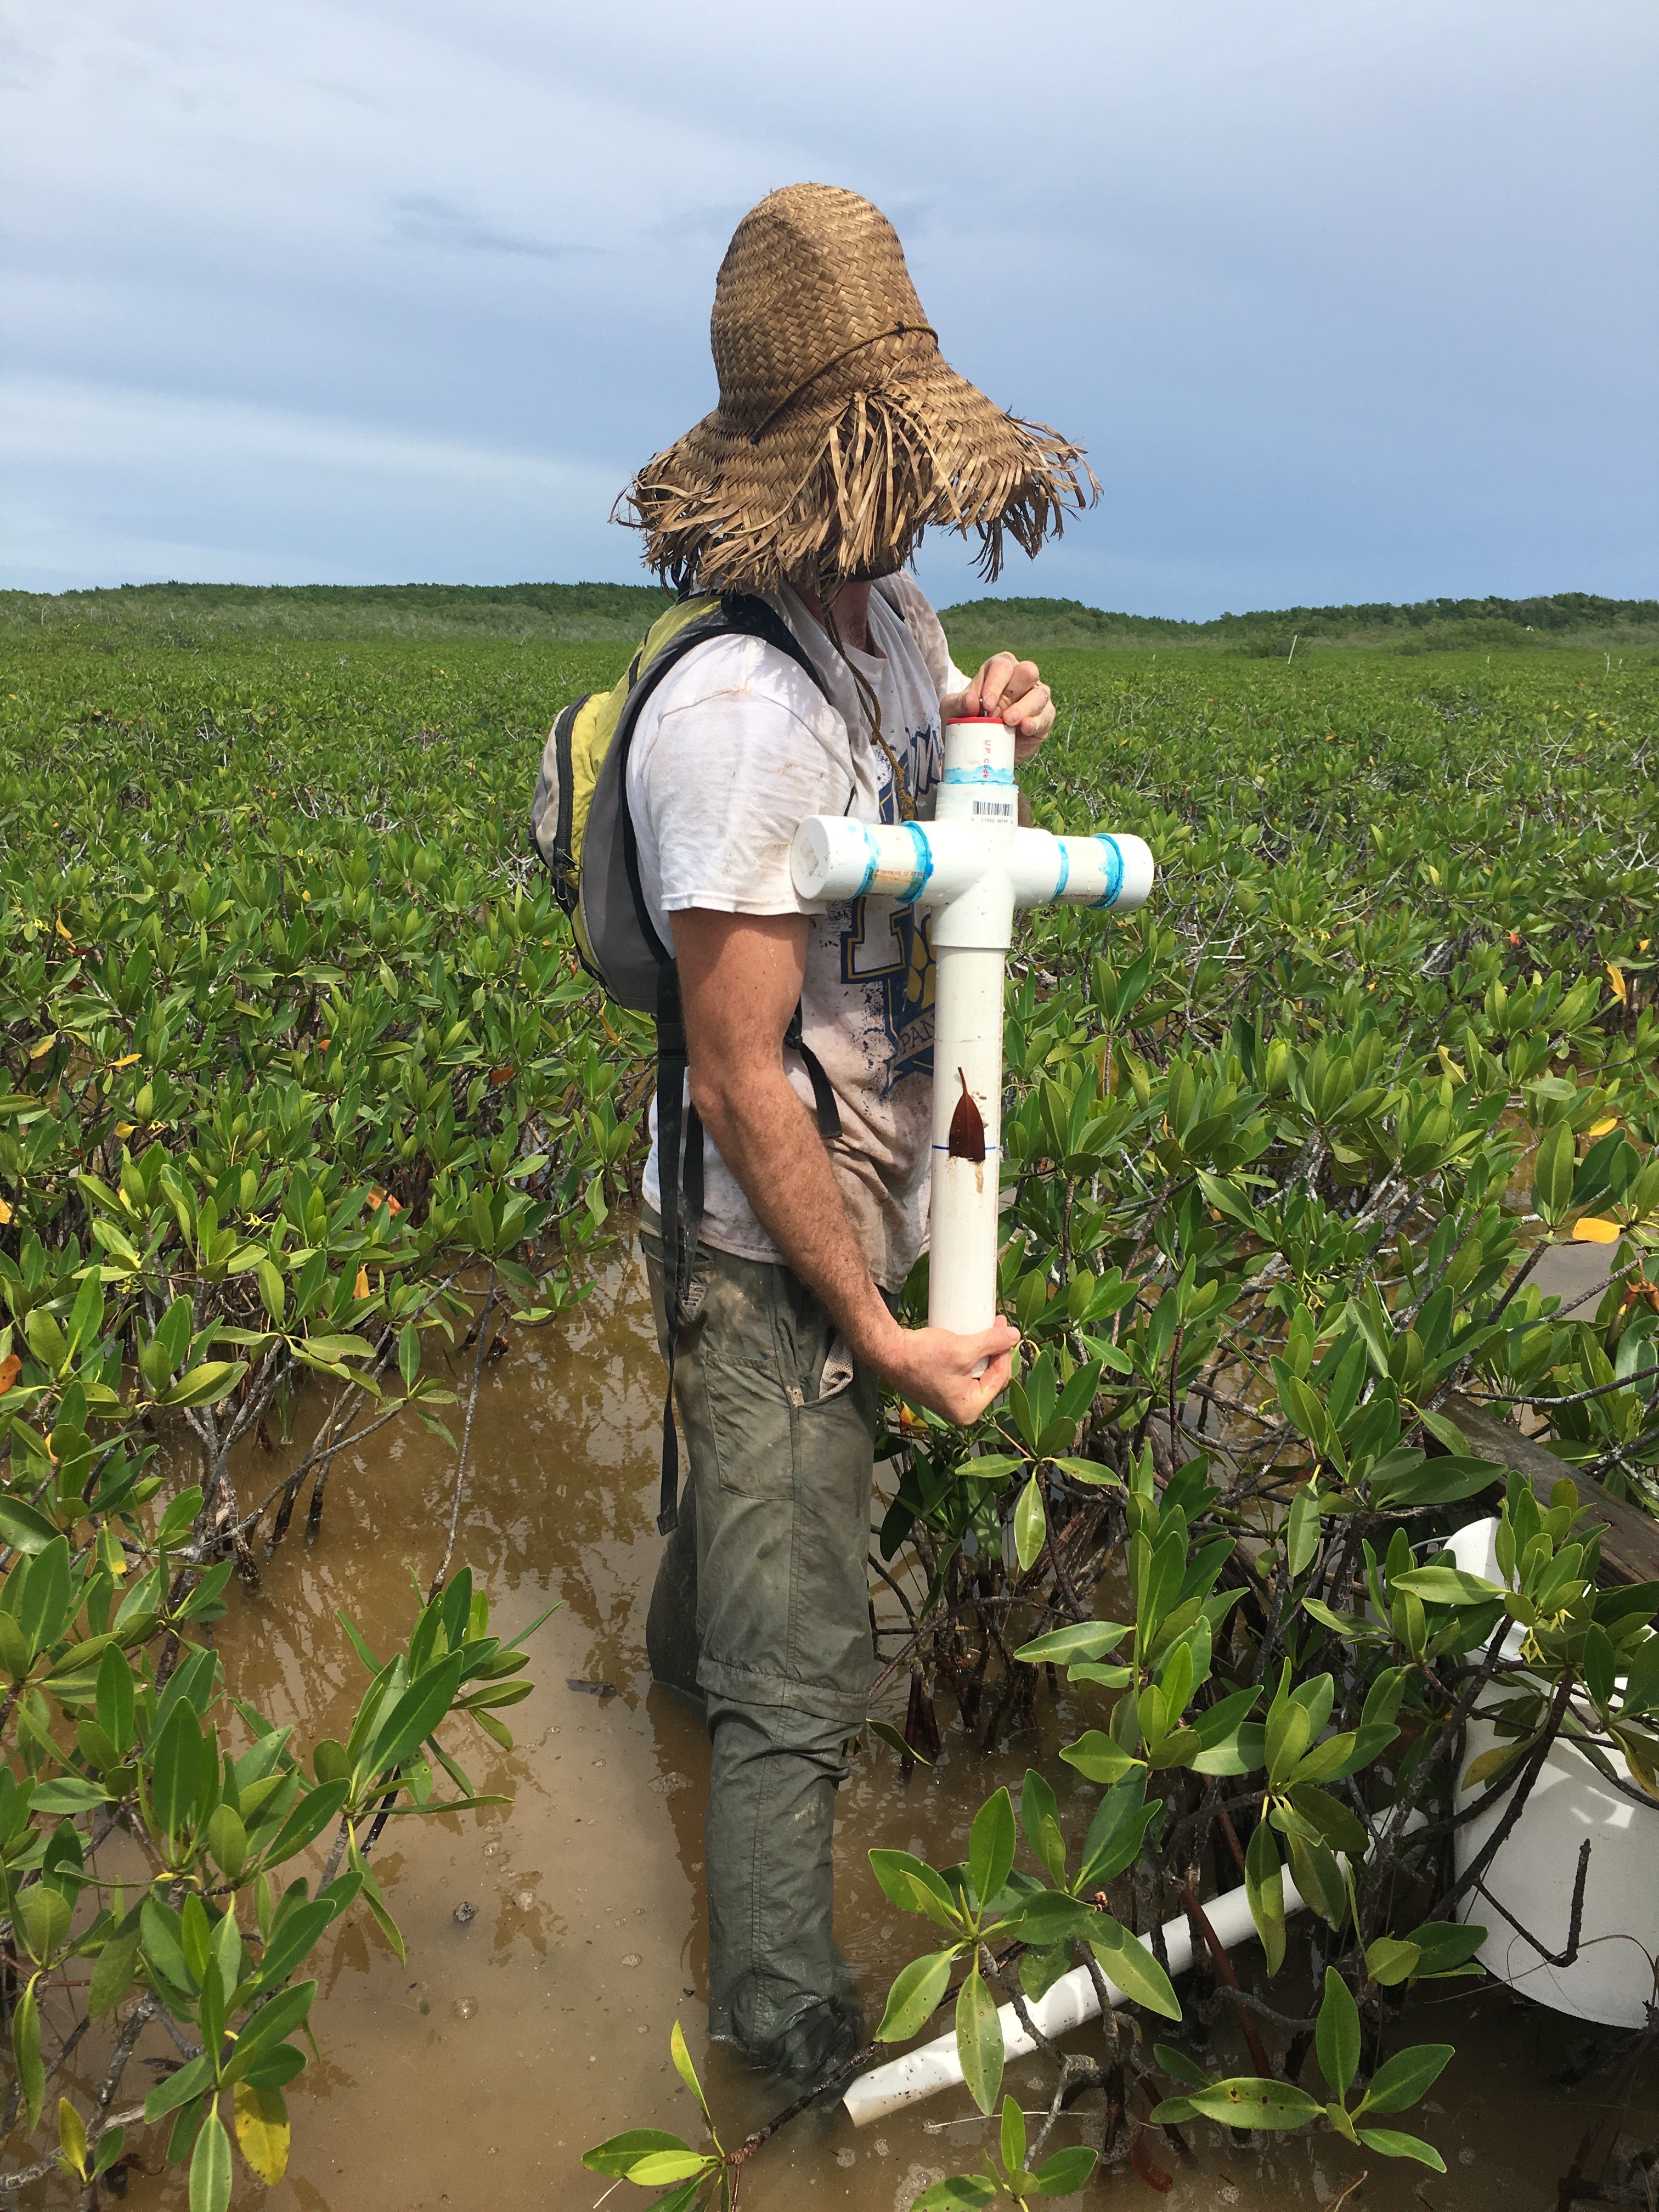 Sean Charles collecting a soil core in dwarf mangroves in Biscayne National Park